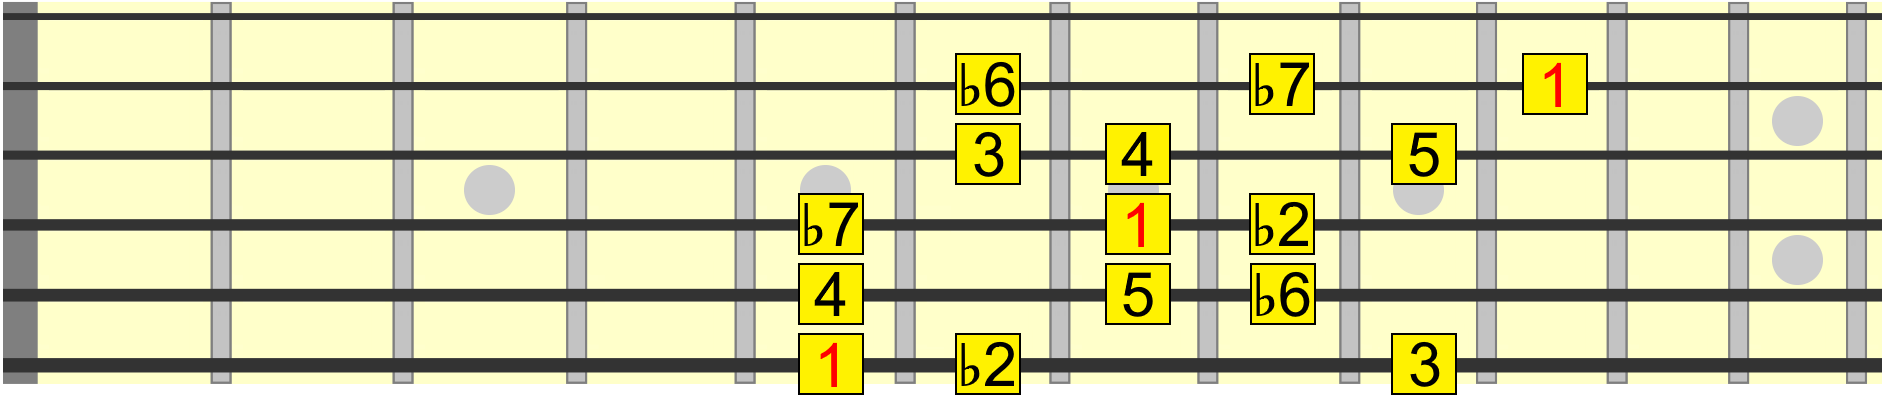 phrygian dominant scale intervals